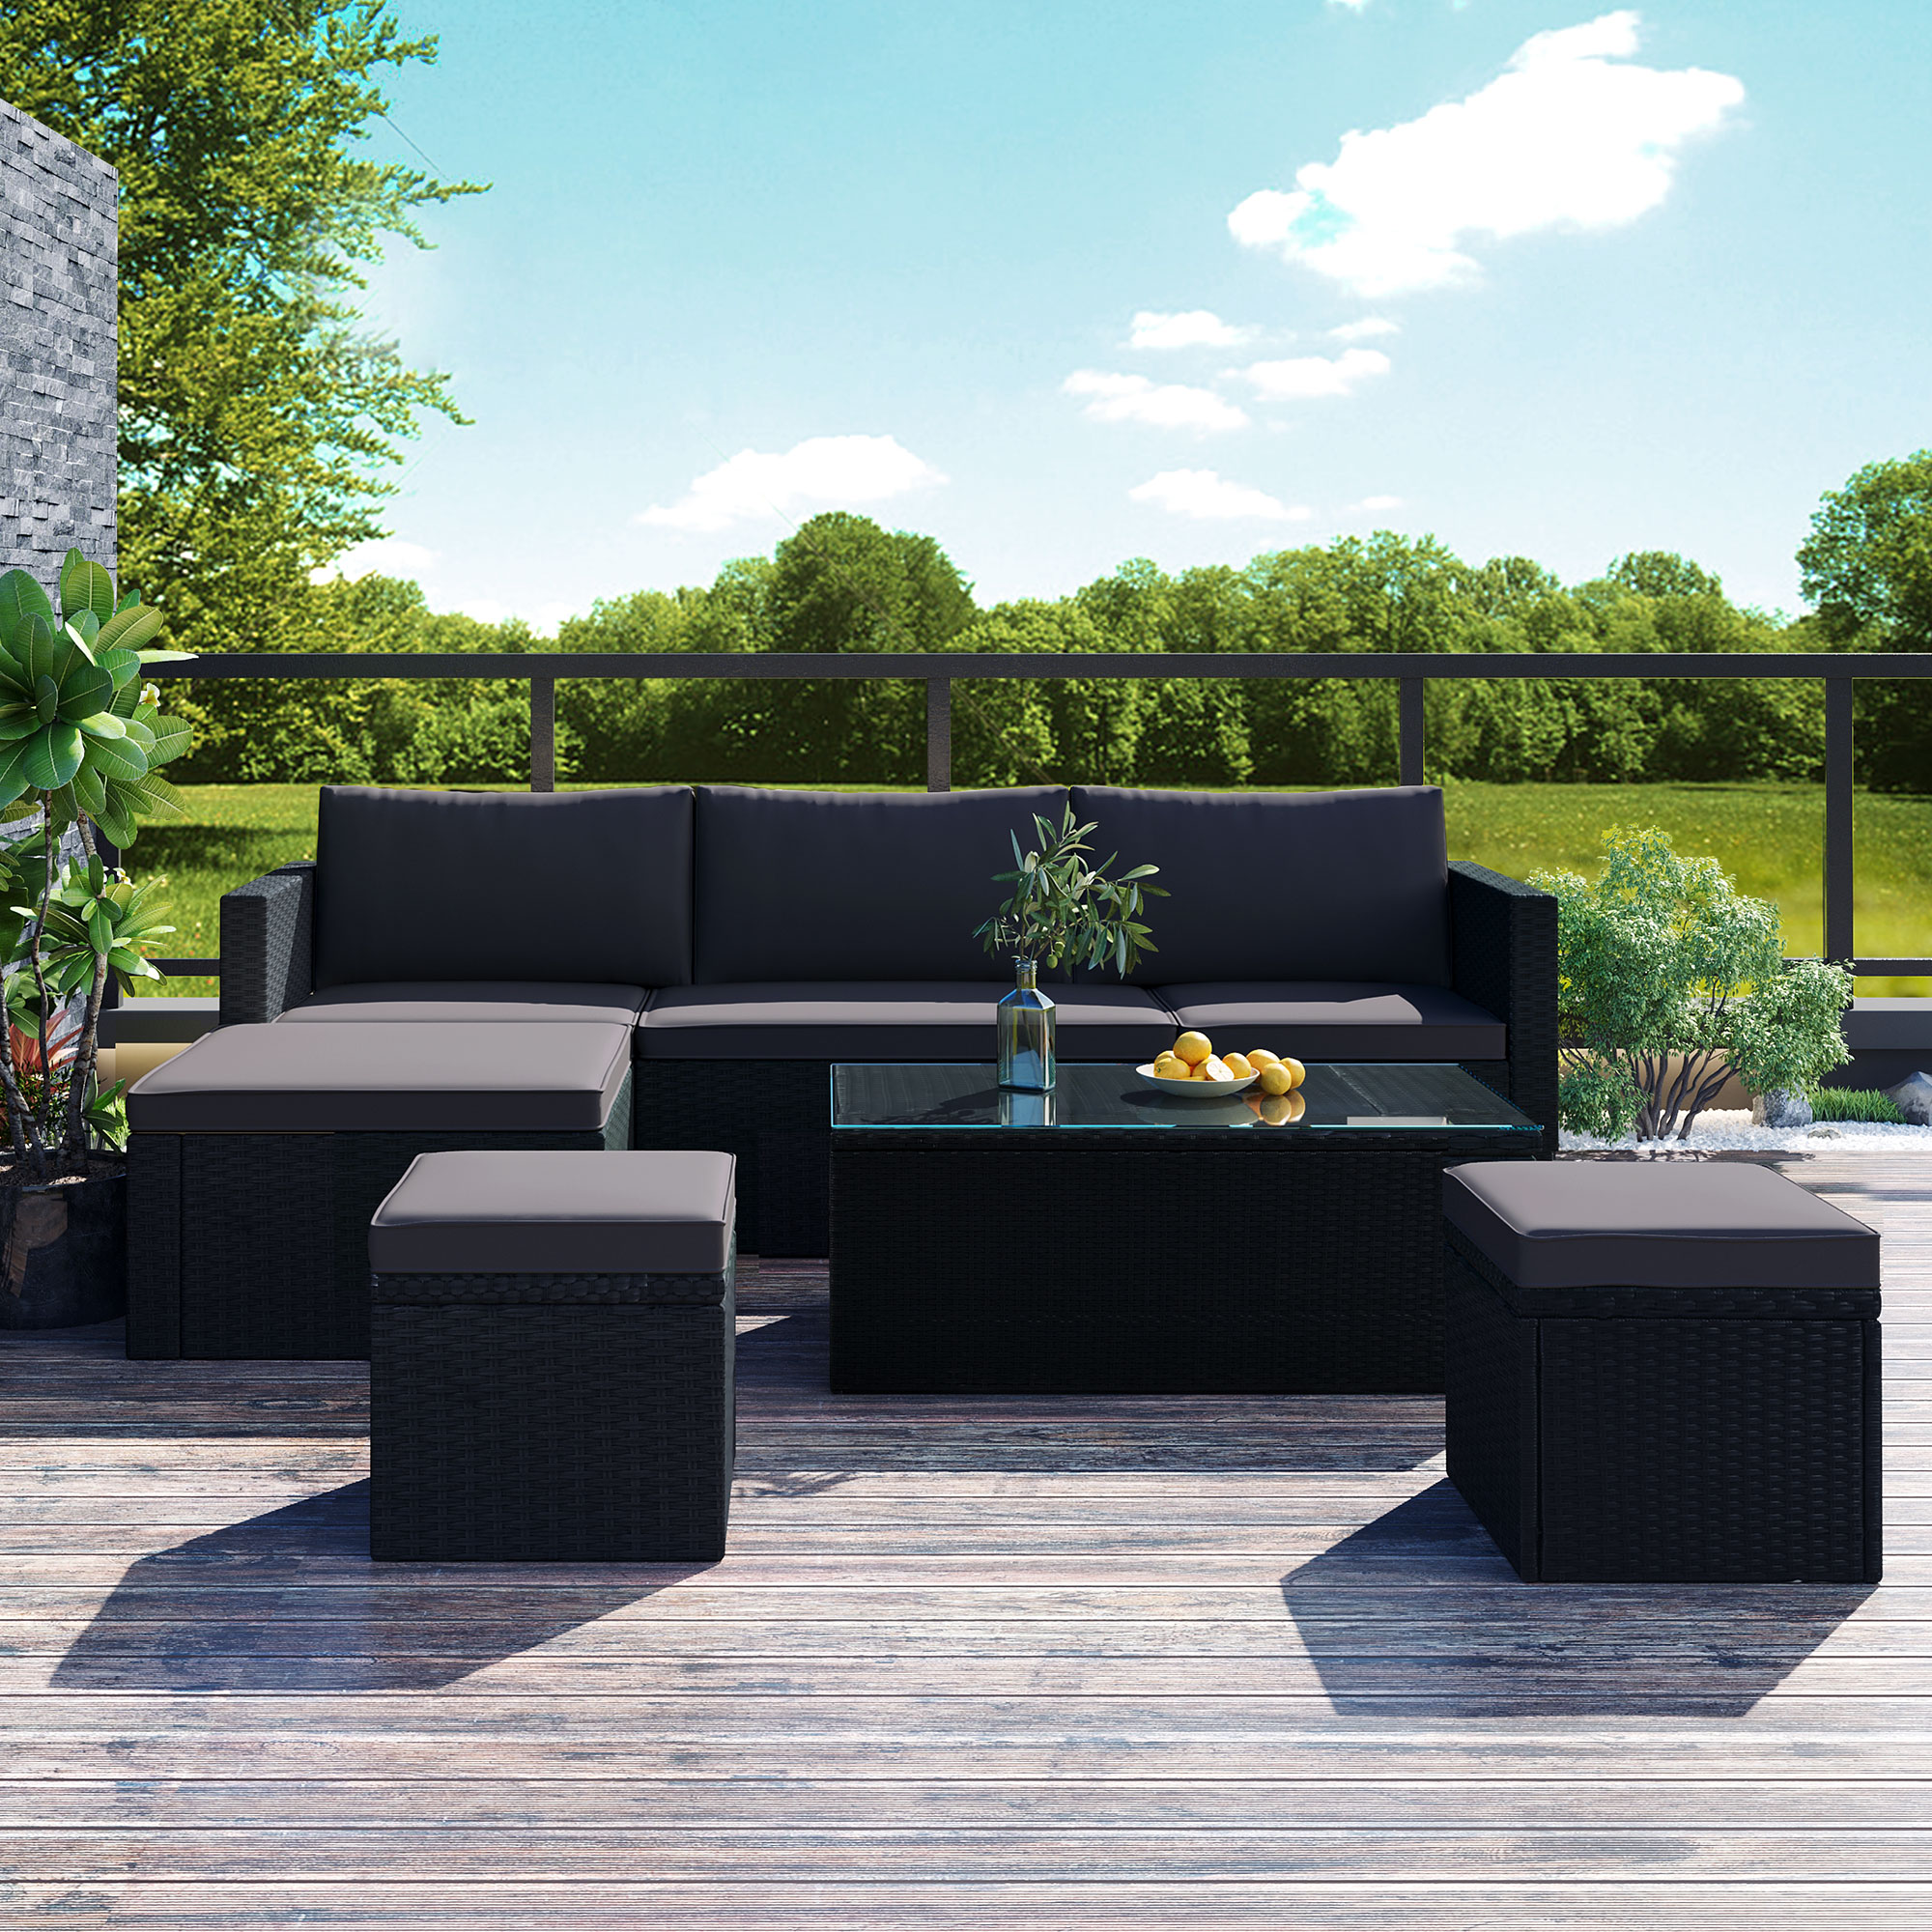 Patio Furniture Sets, Outdoor Sectional Sofa Set Wicker with Adjustable Seat Coffee Table and Ottoman, Outdoor Wicker Sofa Set for Backyard Porch Poolside Garden, Gray - image 2 of 10